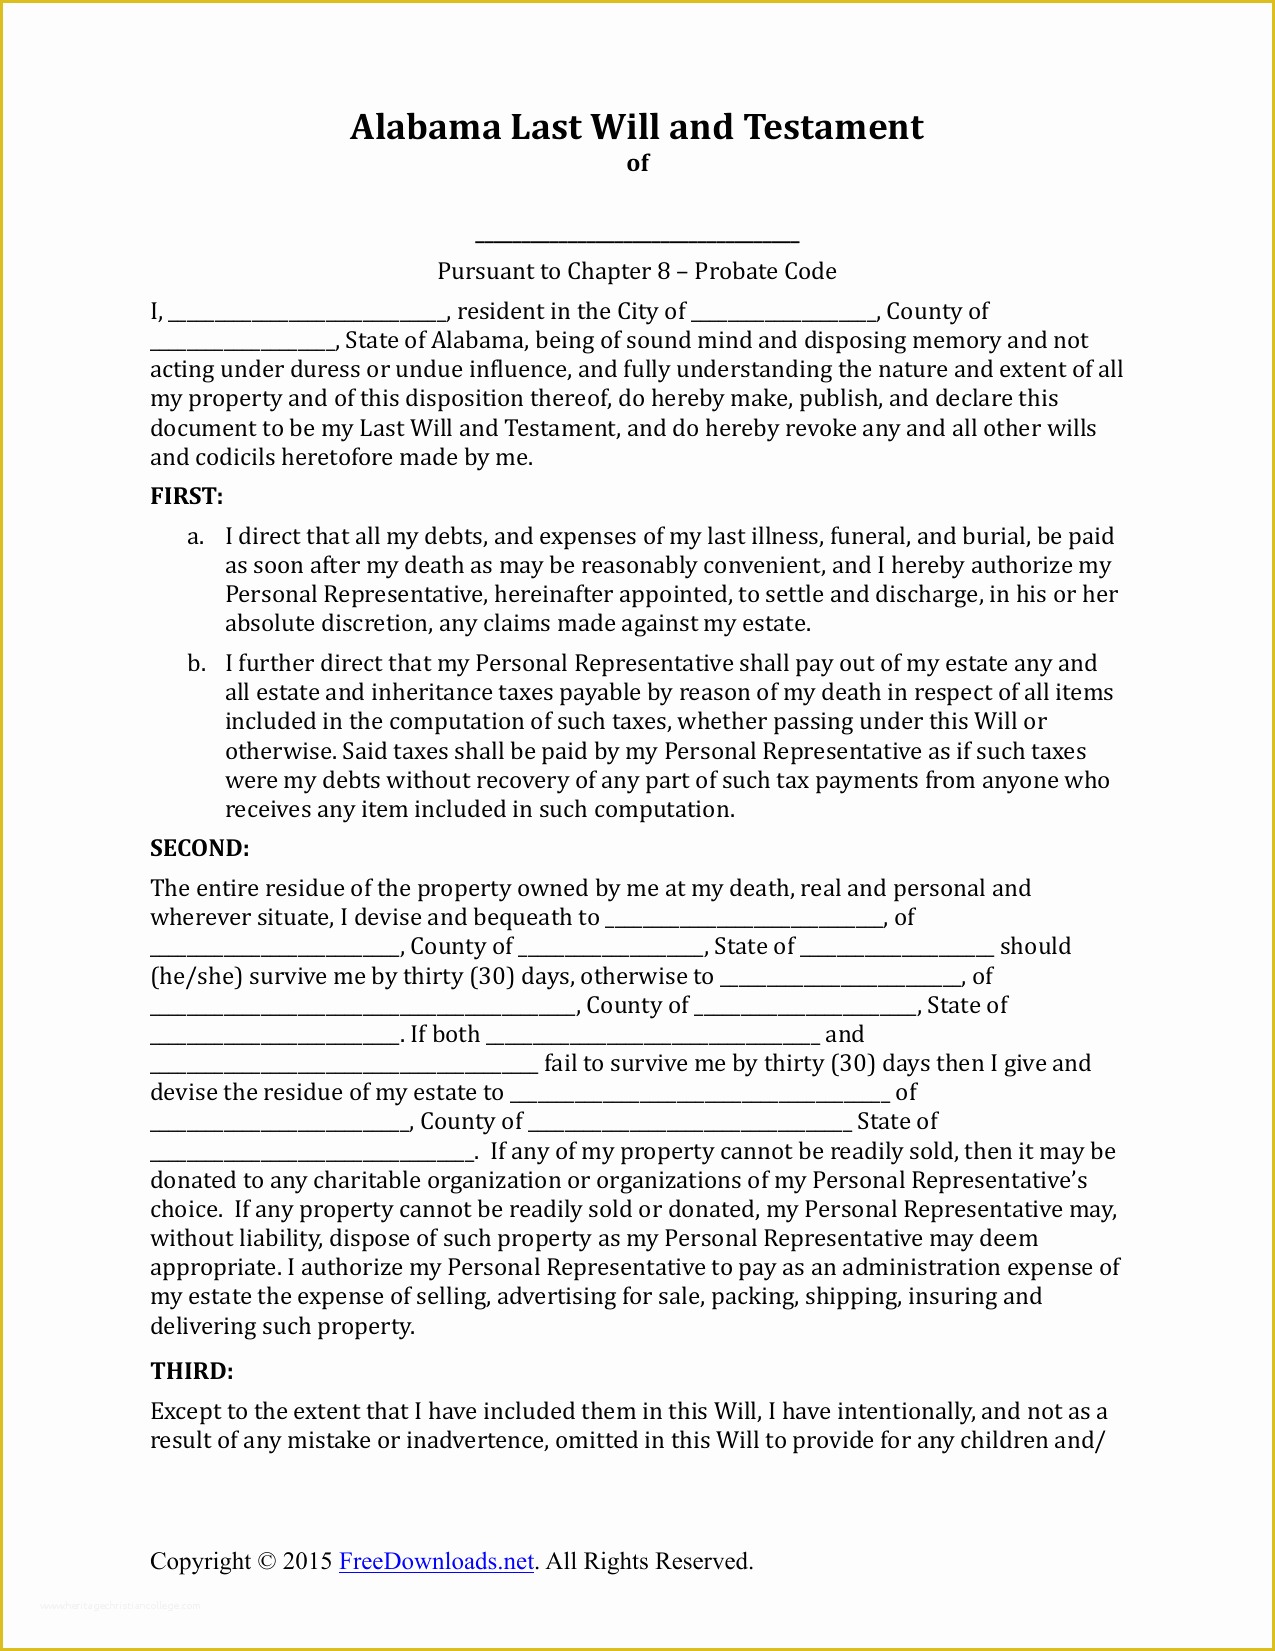 Last Will and Testament Free Template Tennessee Of Download Alabama Last Will and Testament form Pdf